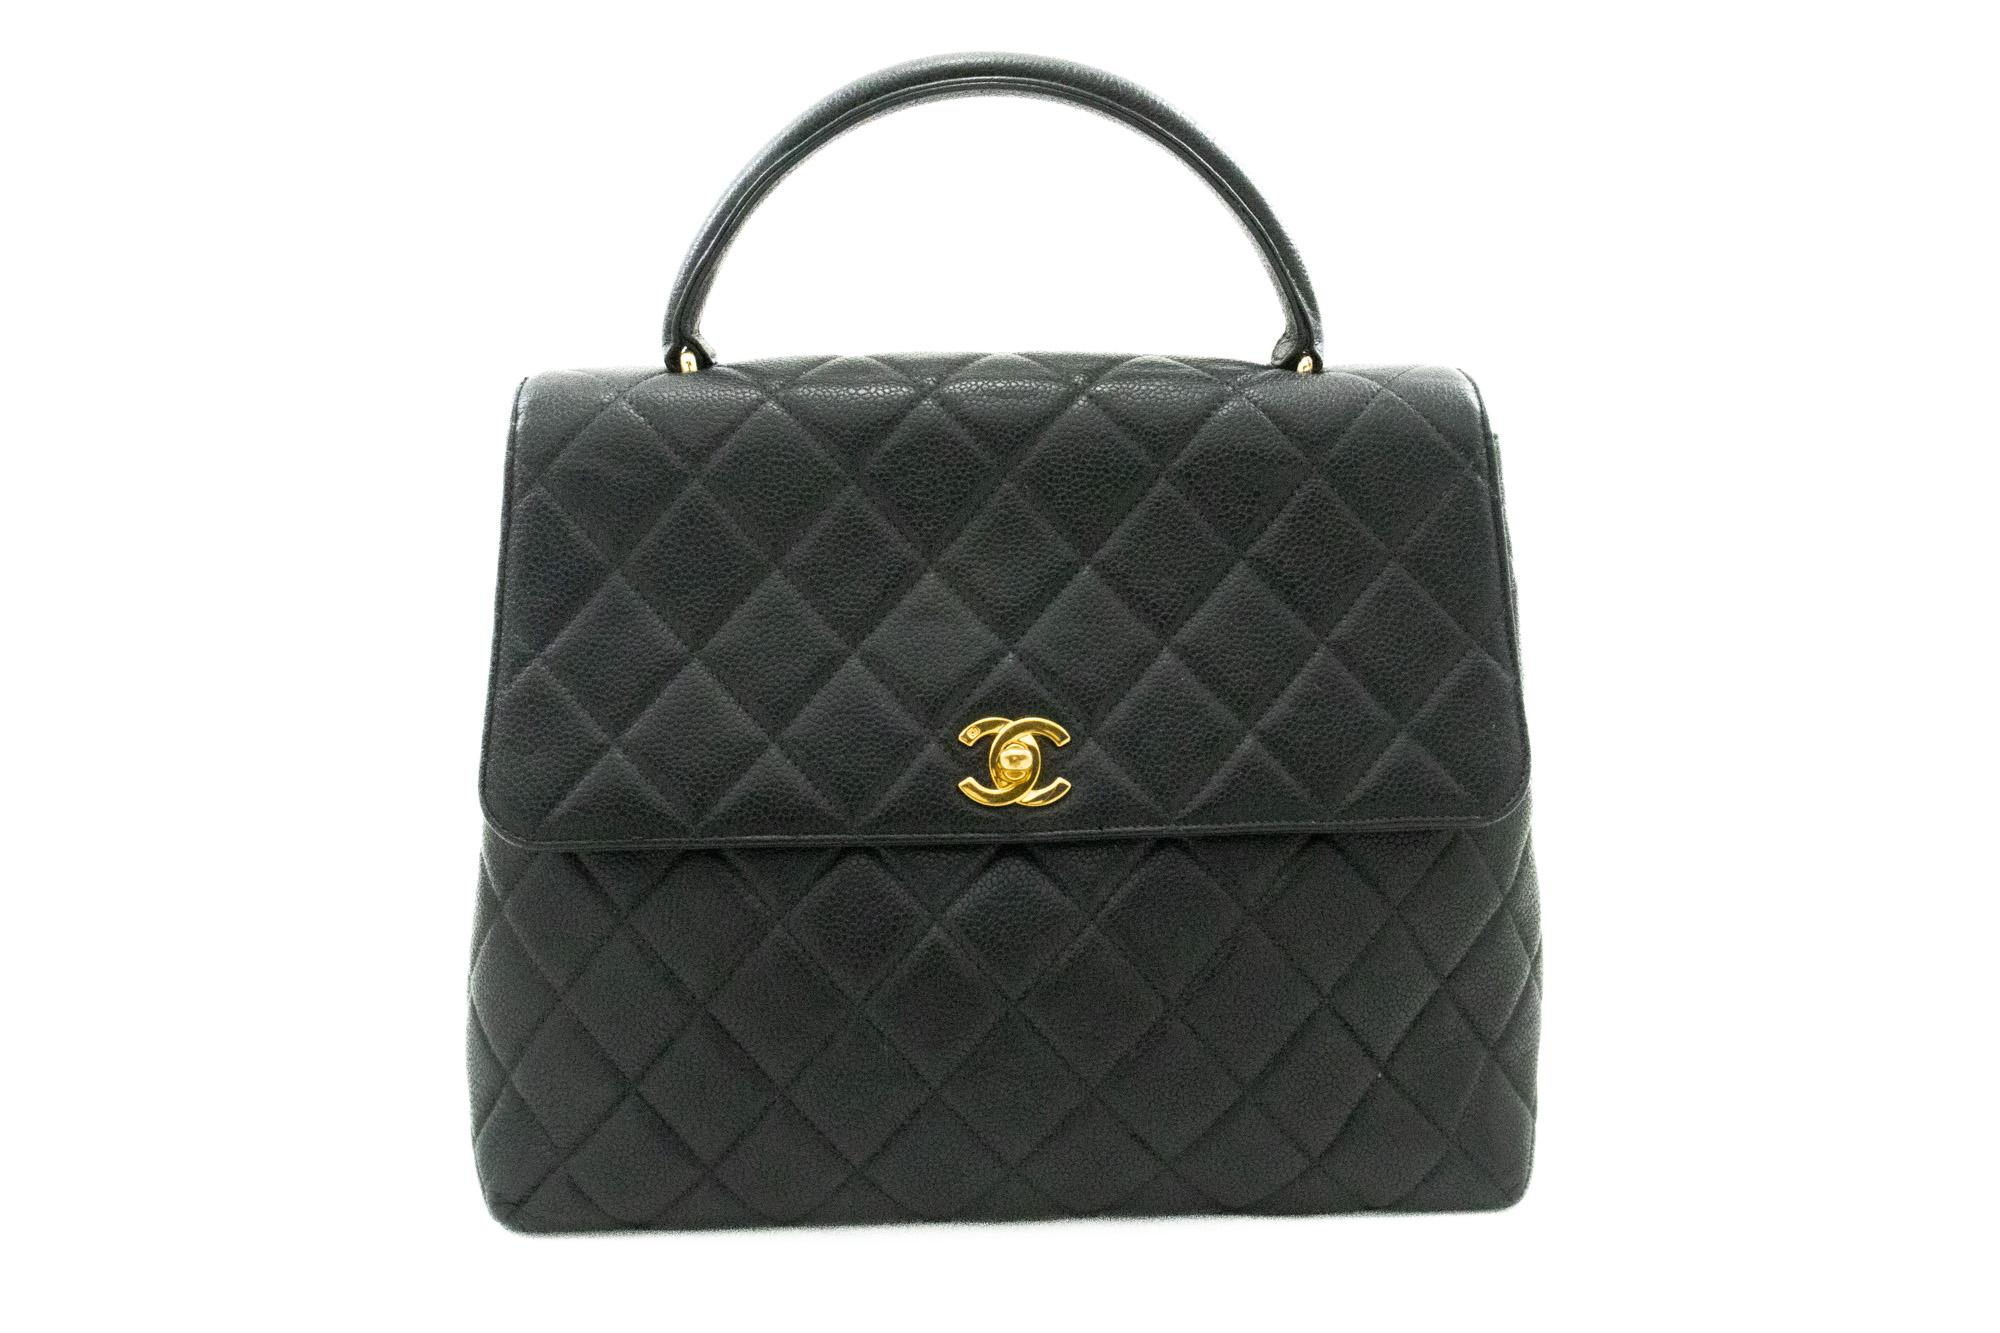 An authentic CHANEL Caviar Handbag Top Handle Bag Kelly Black Flap Leather Gold. The color is Black. The outside material is Leather. The pattern is Solid. This item is Vintage / Classic. The year of manufacture would be 1996-1997.
Conditions &